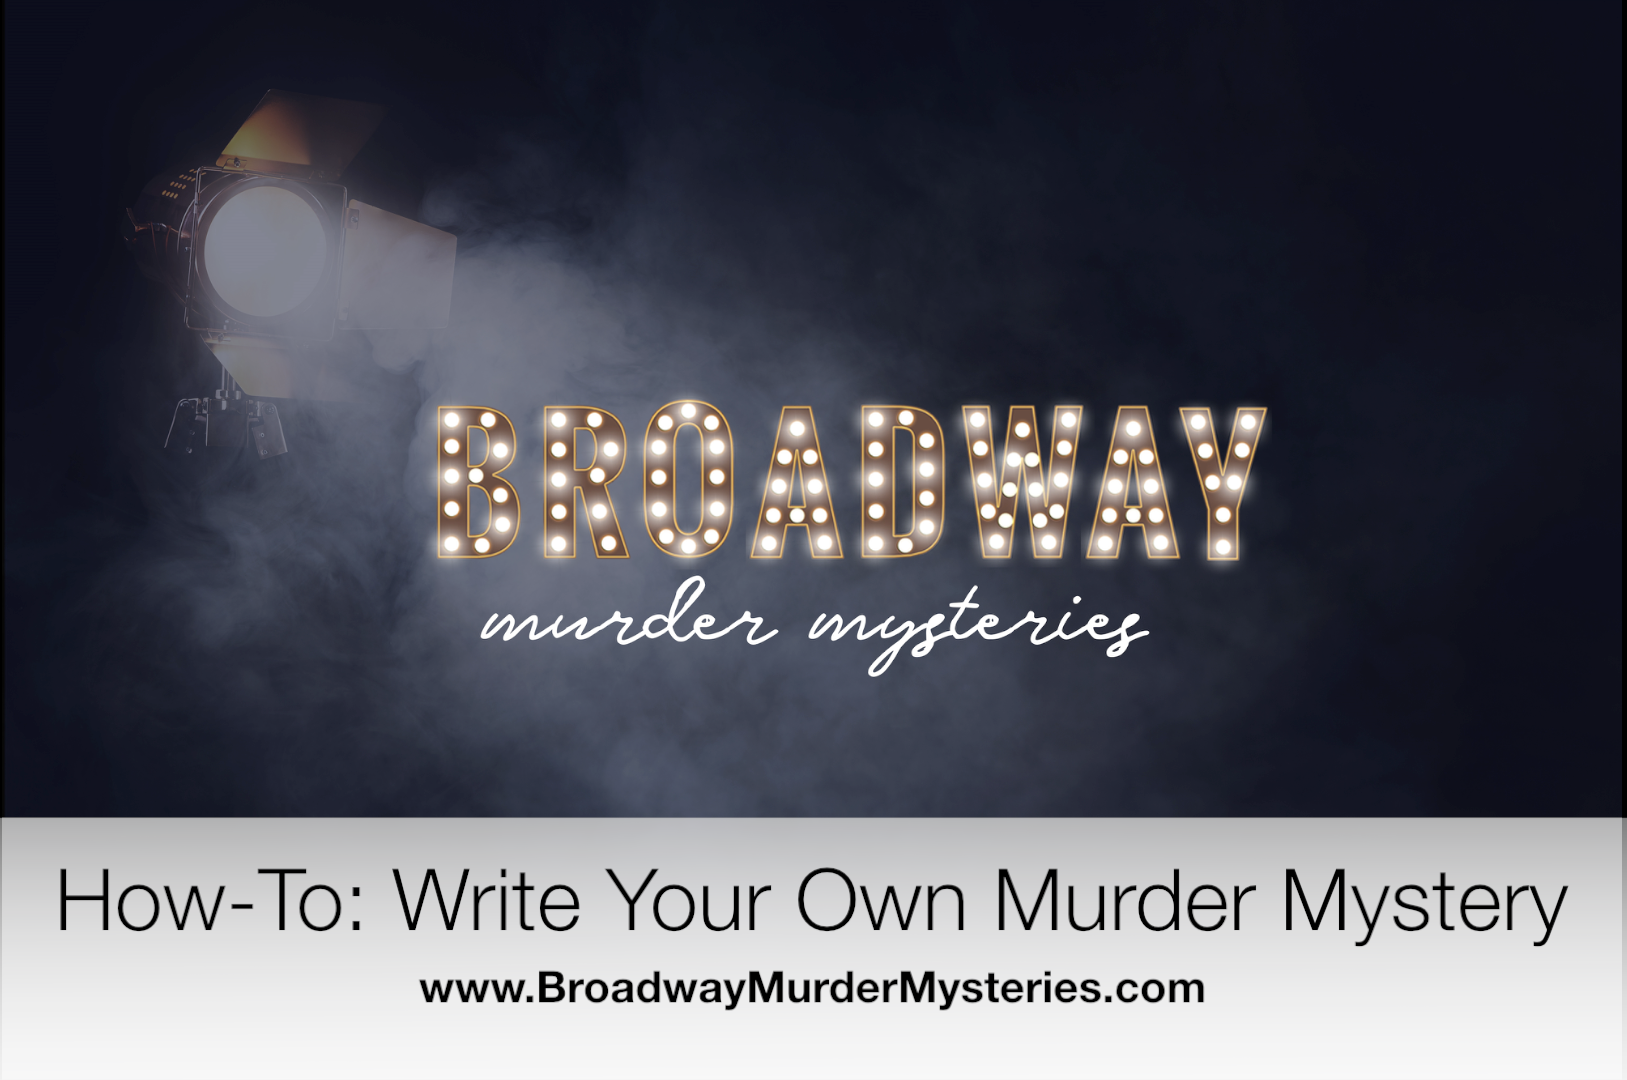 How-To: Write Your Own Murder Mystery Game! — Broadway Murder